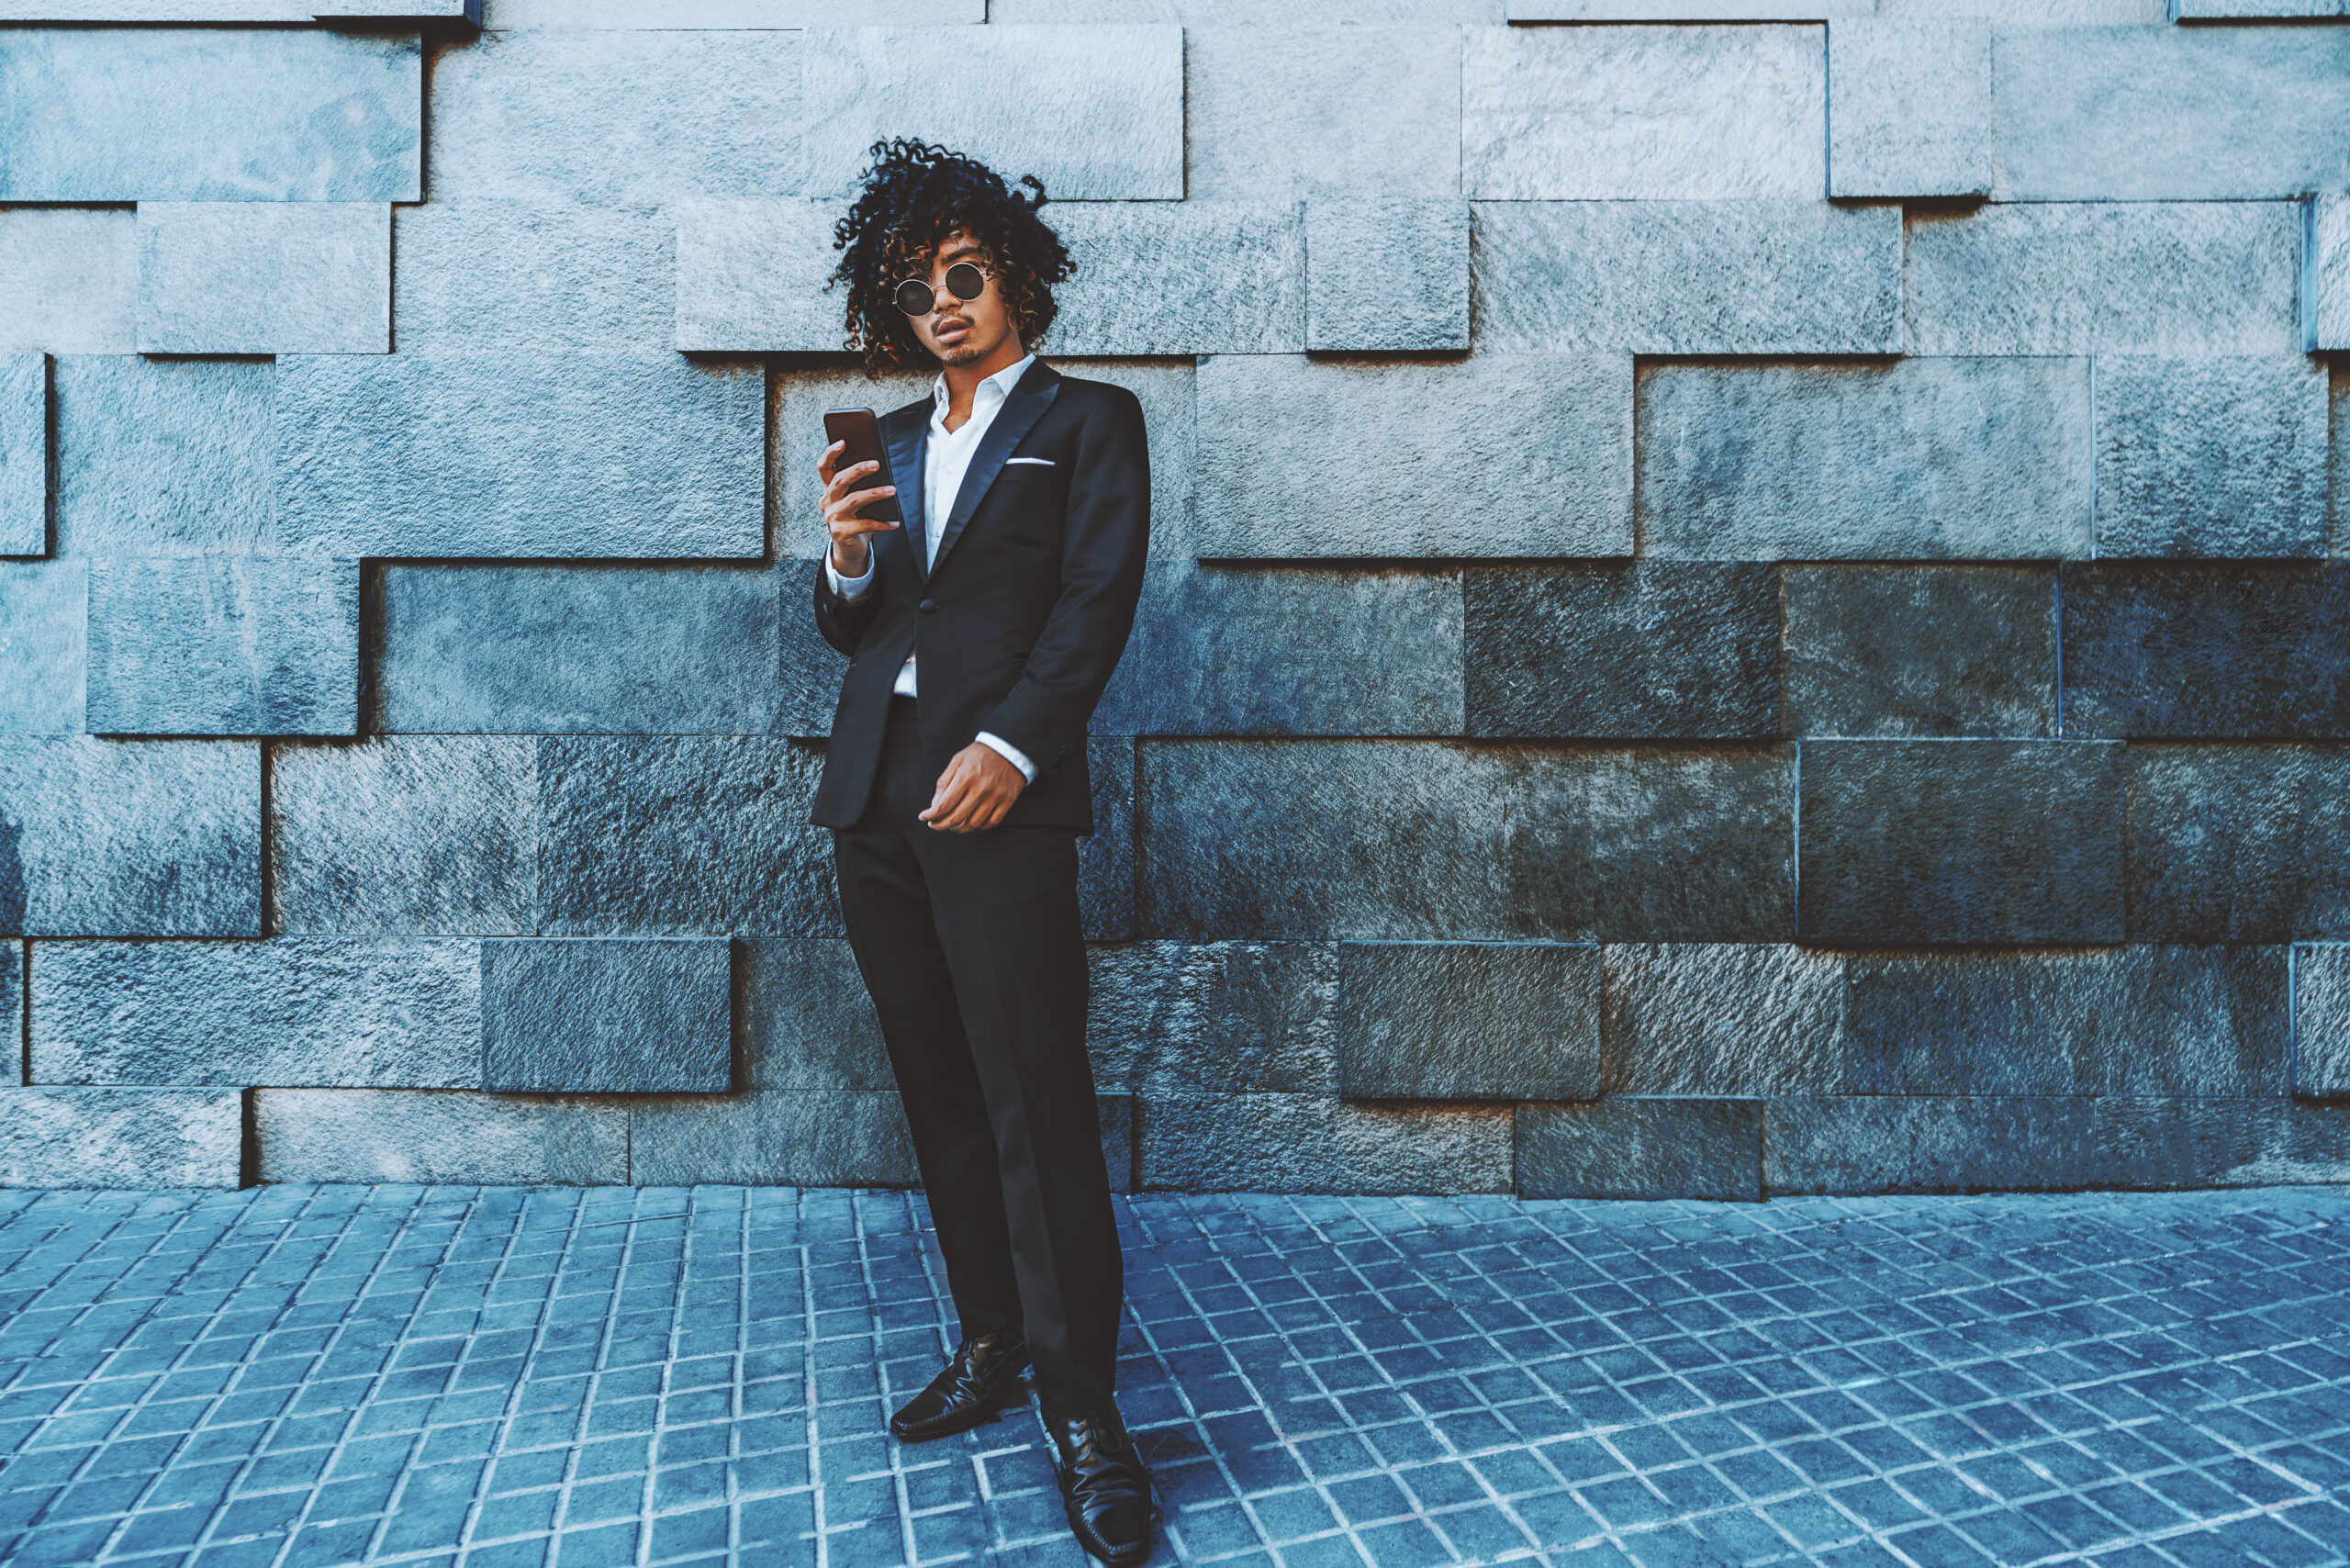 An entrepreneur in a chic black suit and sunglasses stands casually against a textured stone wall, smartphone in hand, representing the epitome of Mastering Visual Content for Dynamic Social Media.